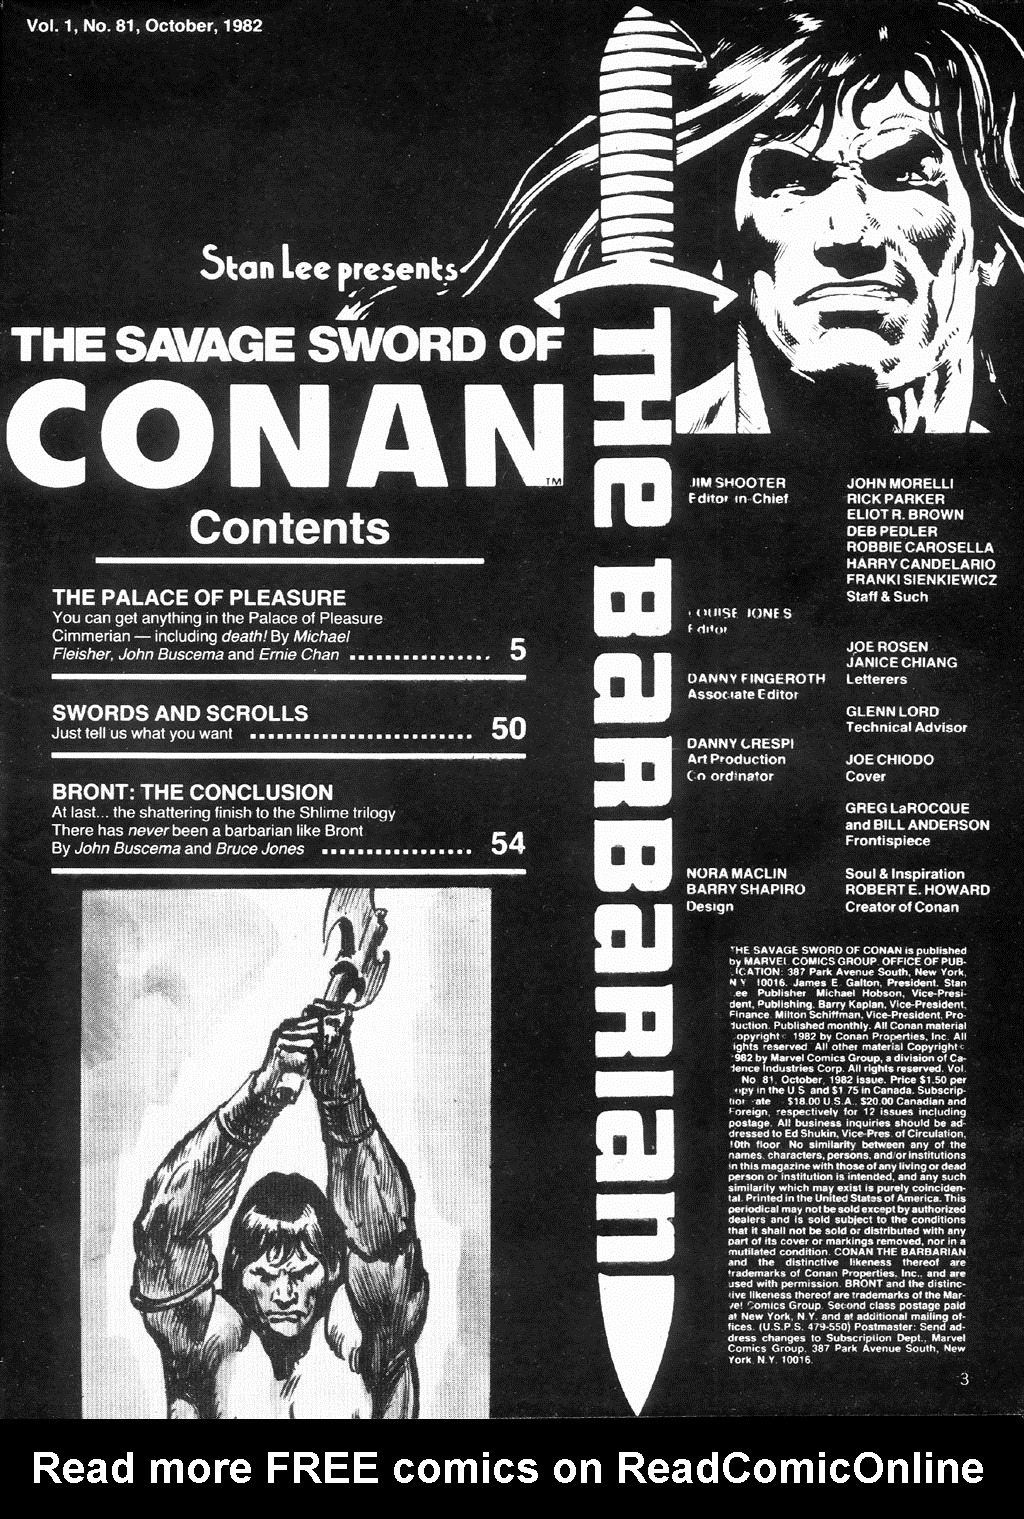 Read online The Savage Sword Of Conan comic -  Issue #81 - 3